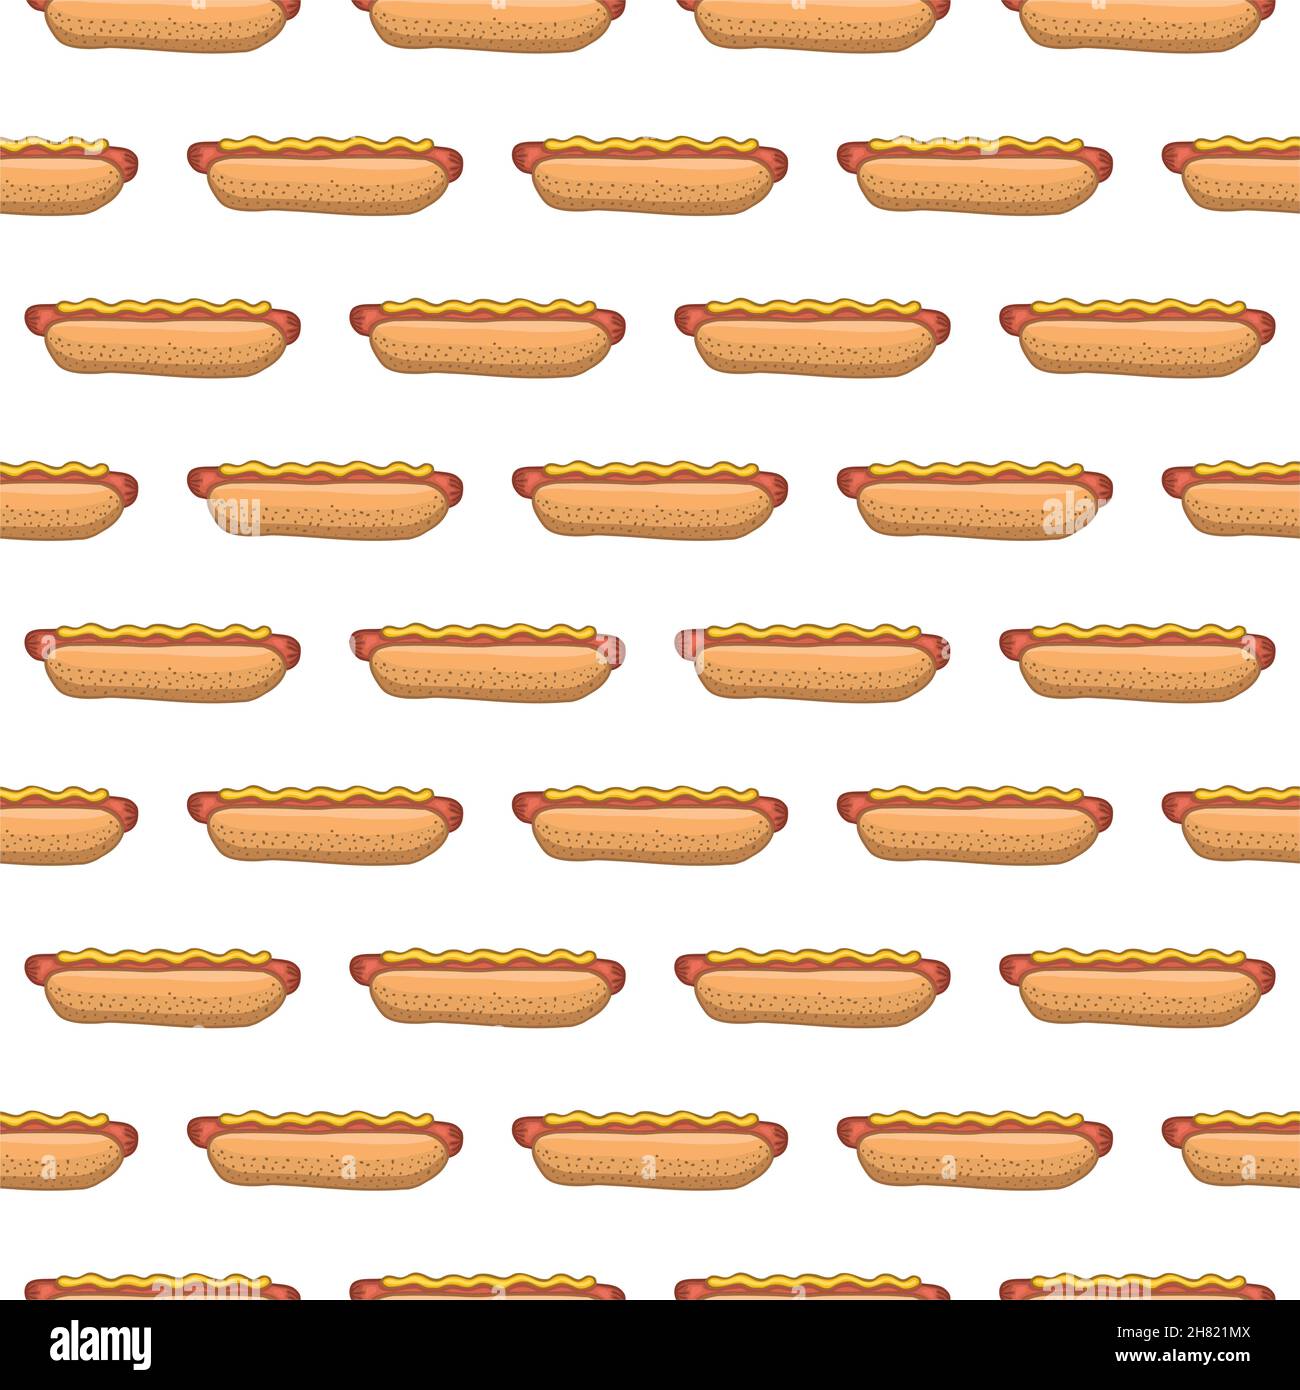 Seamless pattern of hot dogs, vector illustration. Stock Vector